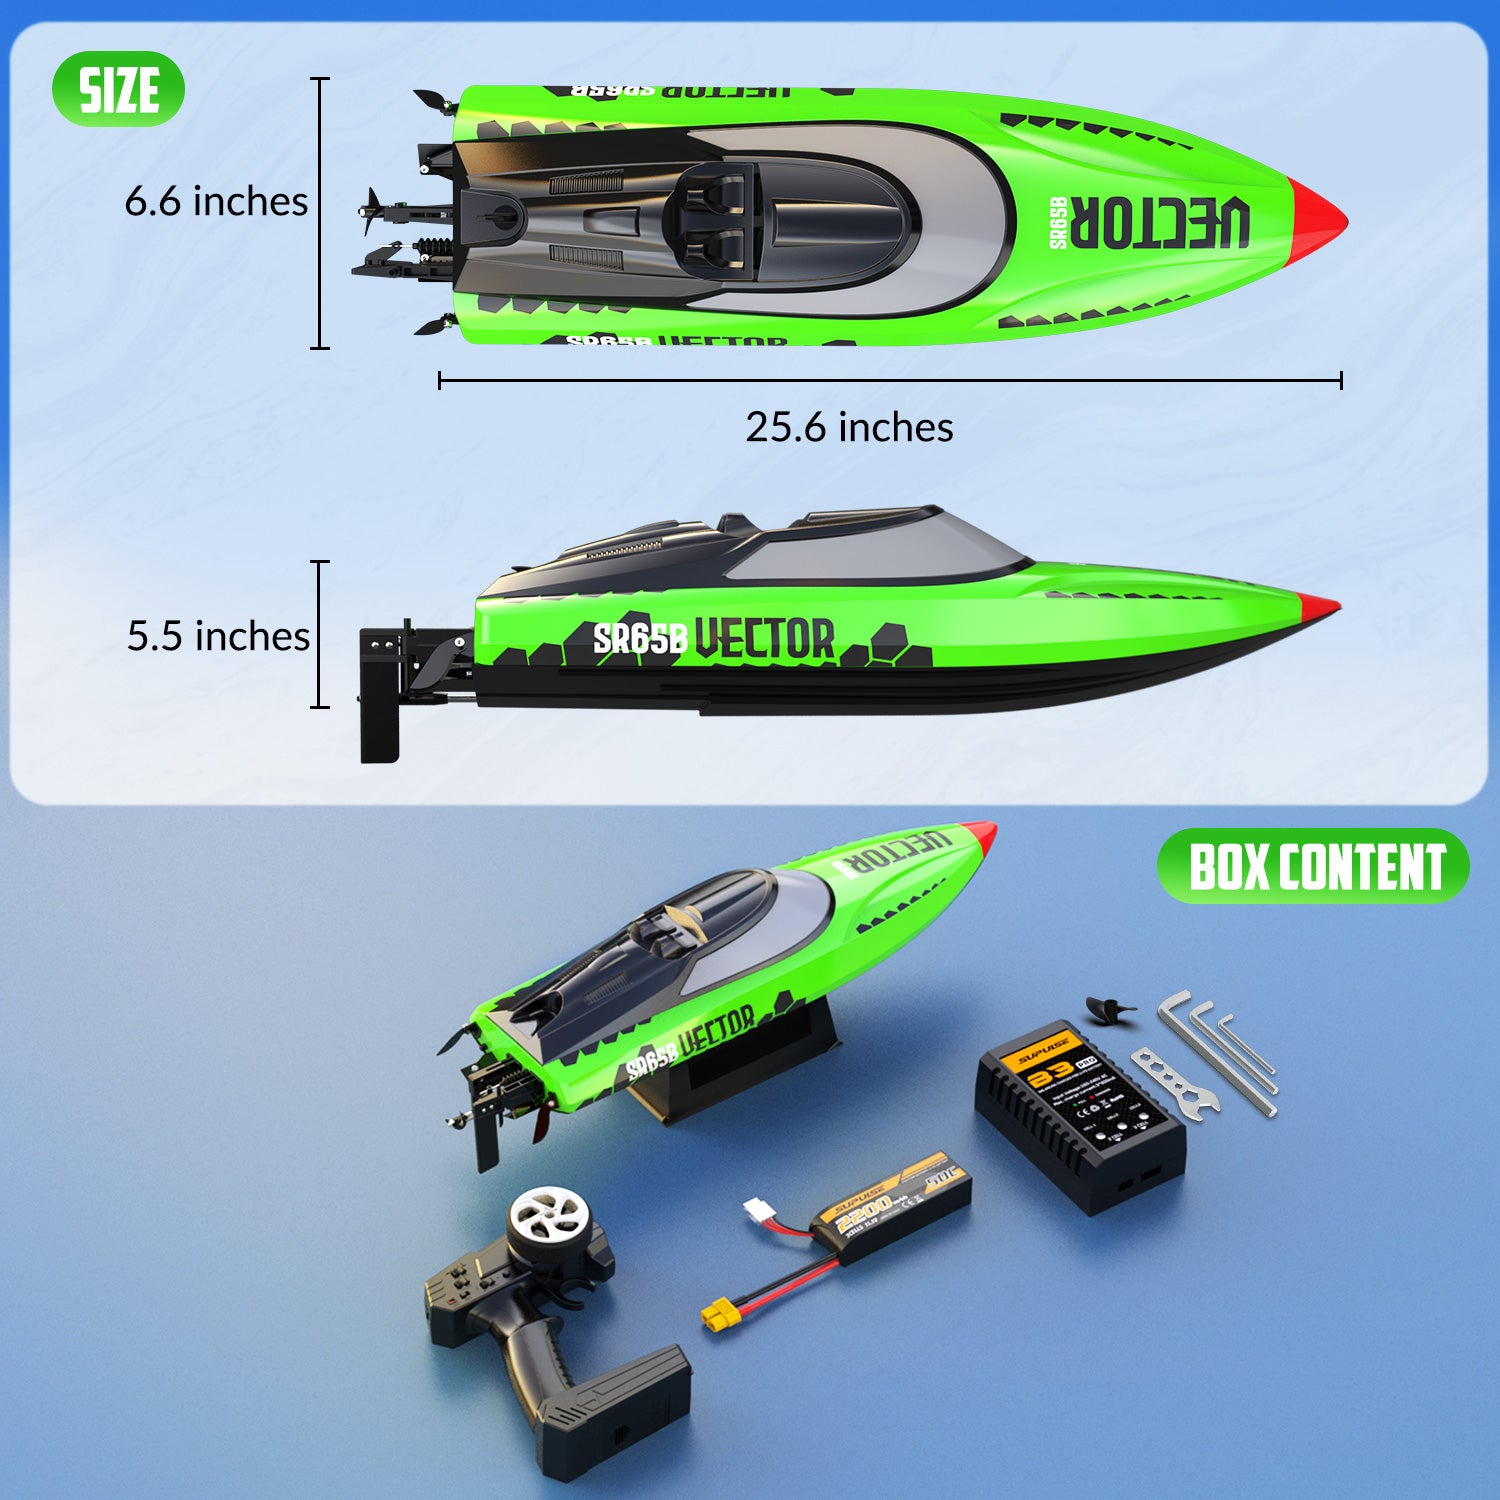 VectorSR65B High-Speed Brushless RC Boat 37MPH Self-righting Reverse RTR